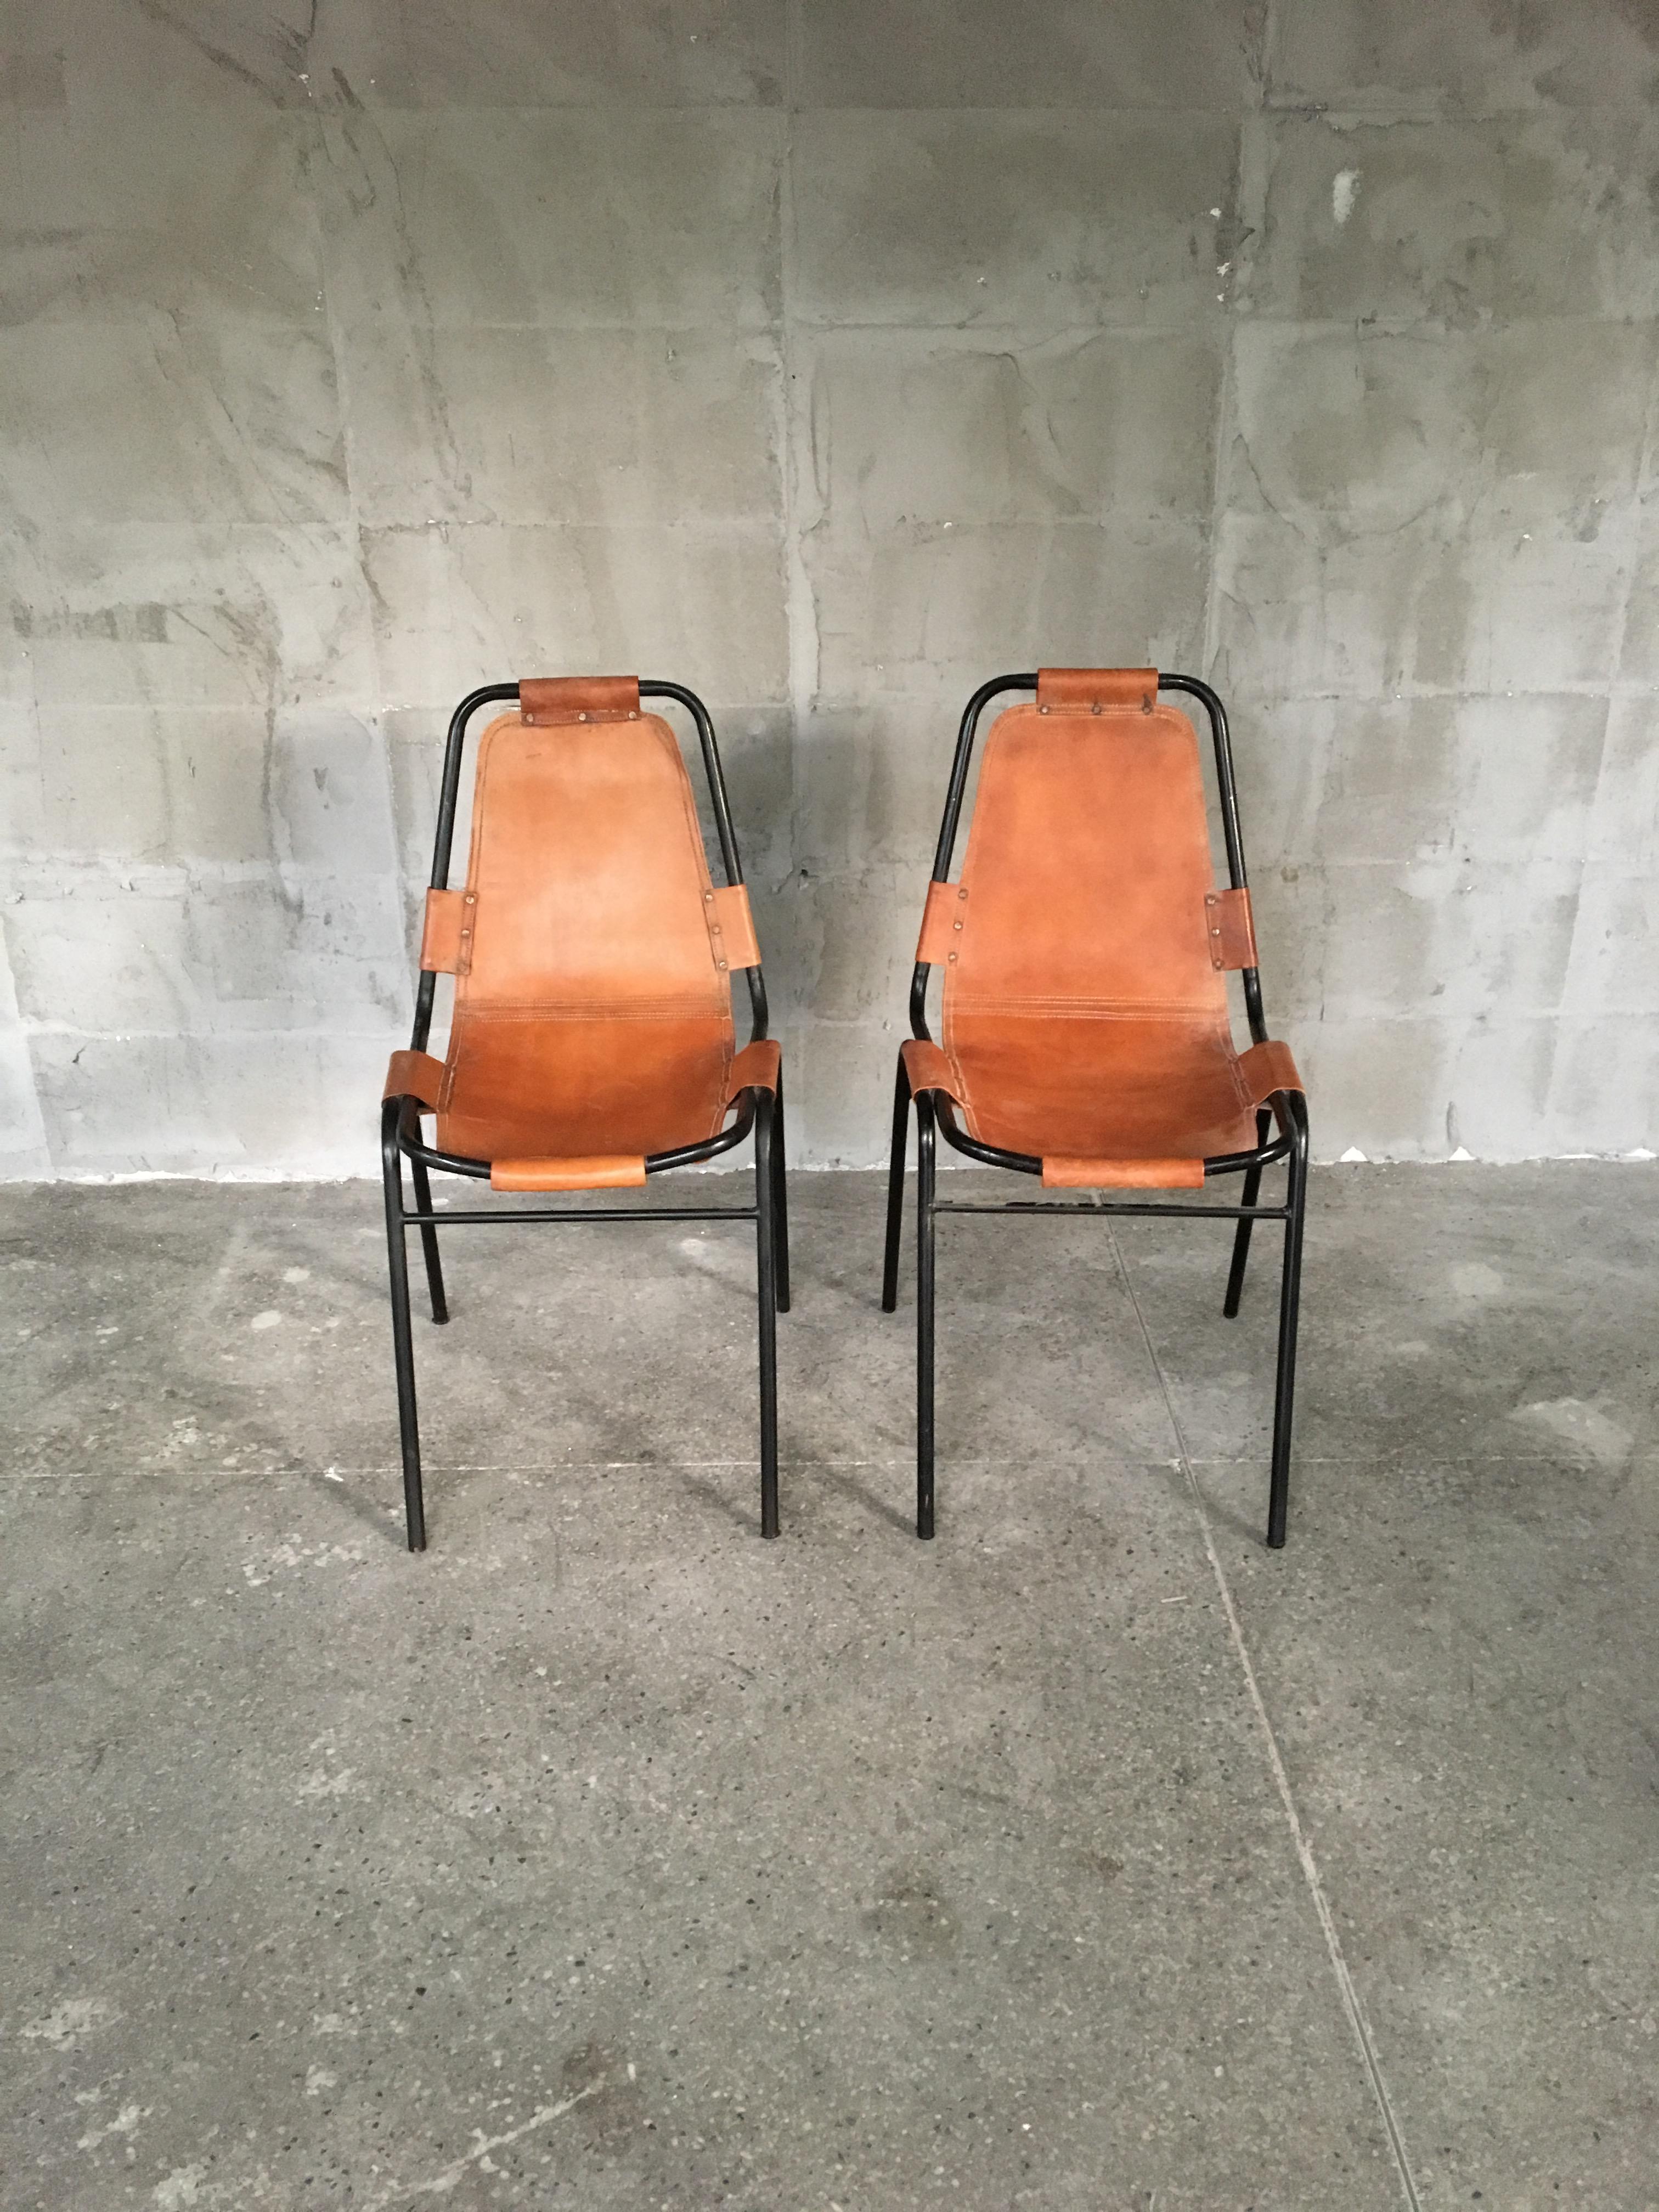 A rare pair of lovely and and especially charming chairs by the famous French designer Charlotte Perriand, made in the 1950s. The metal structure is painted in black, that is very rare and indicative sign for the 1950's, which gives them particular